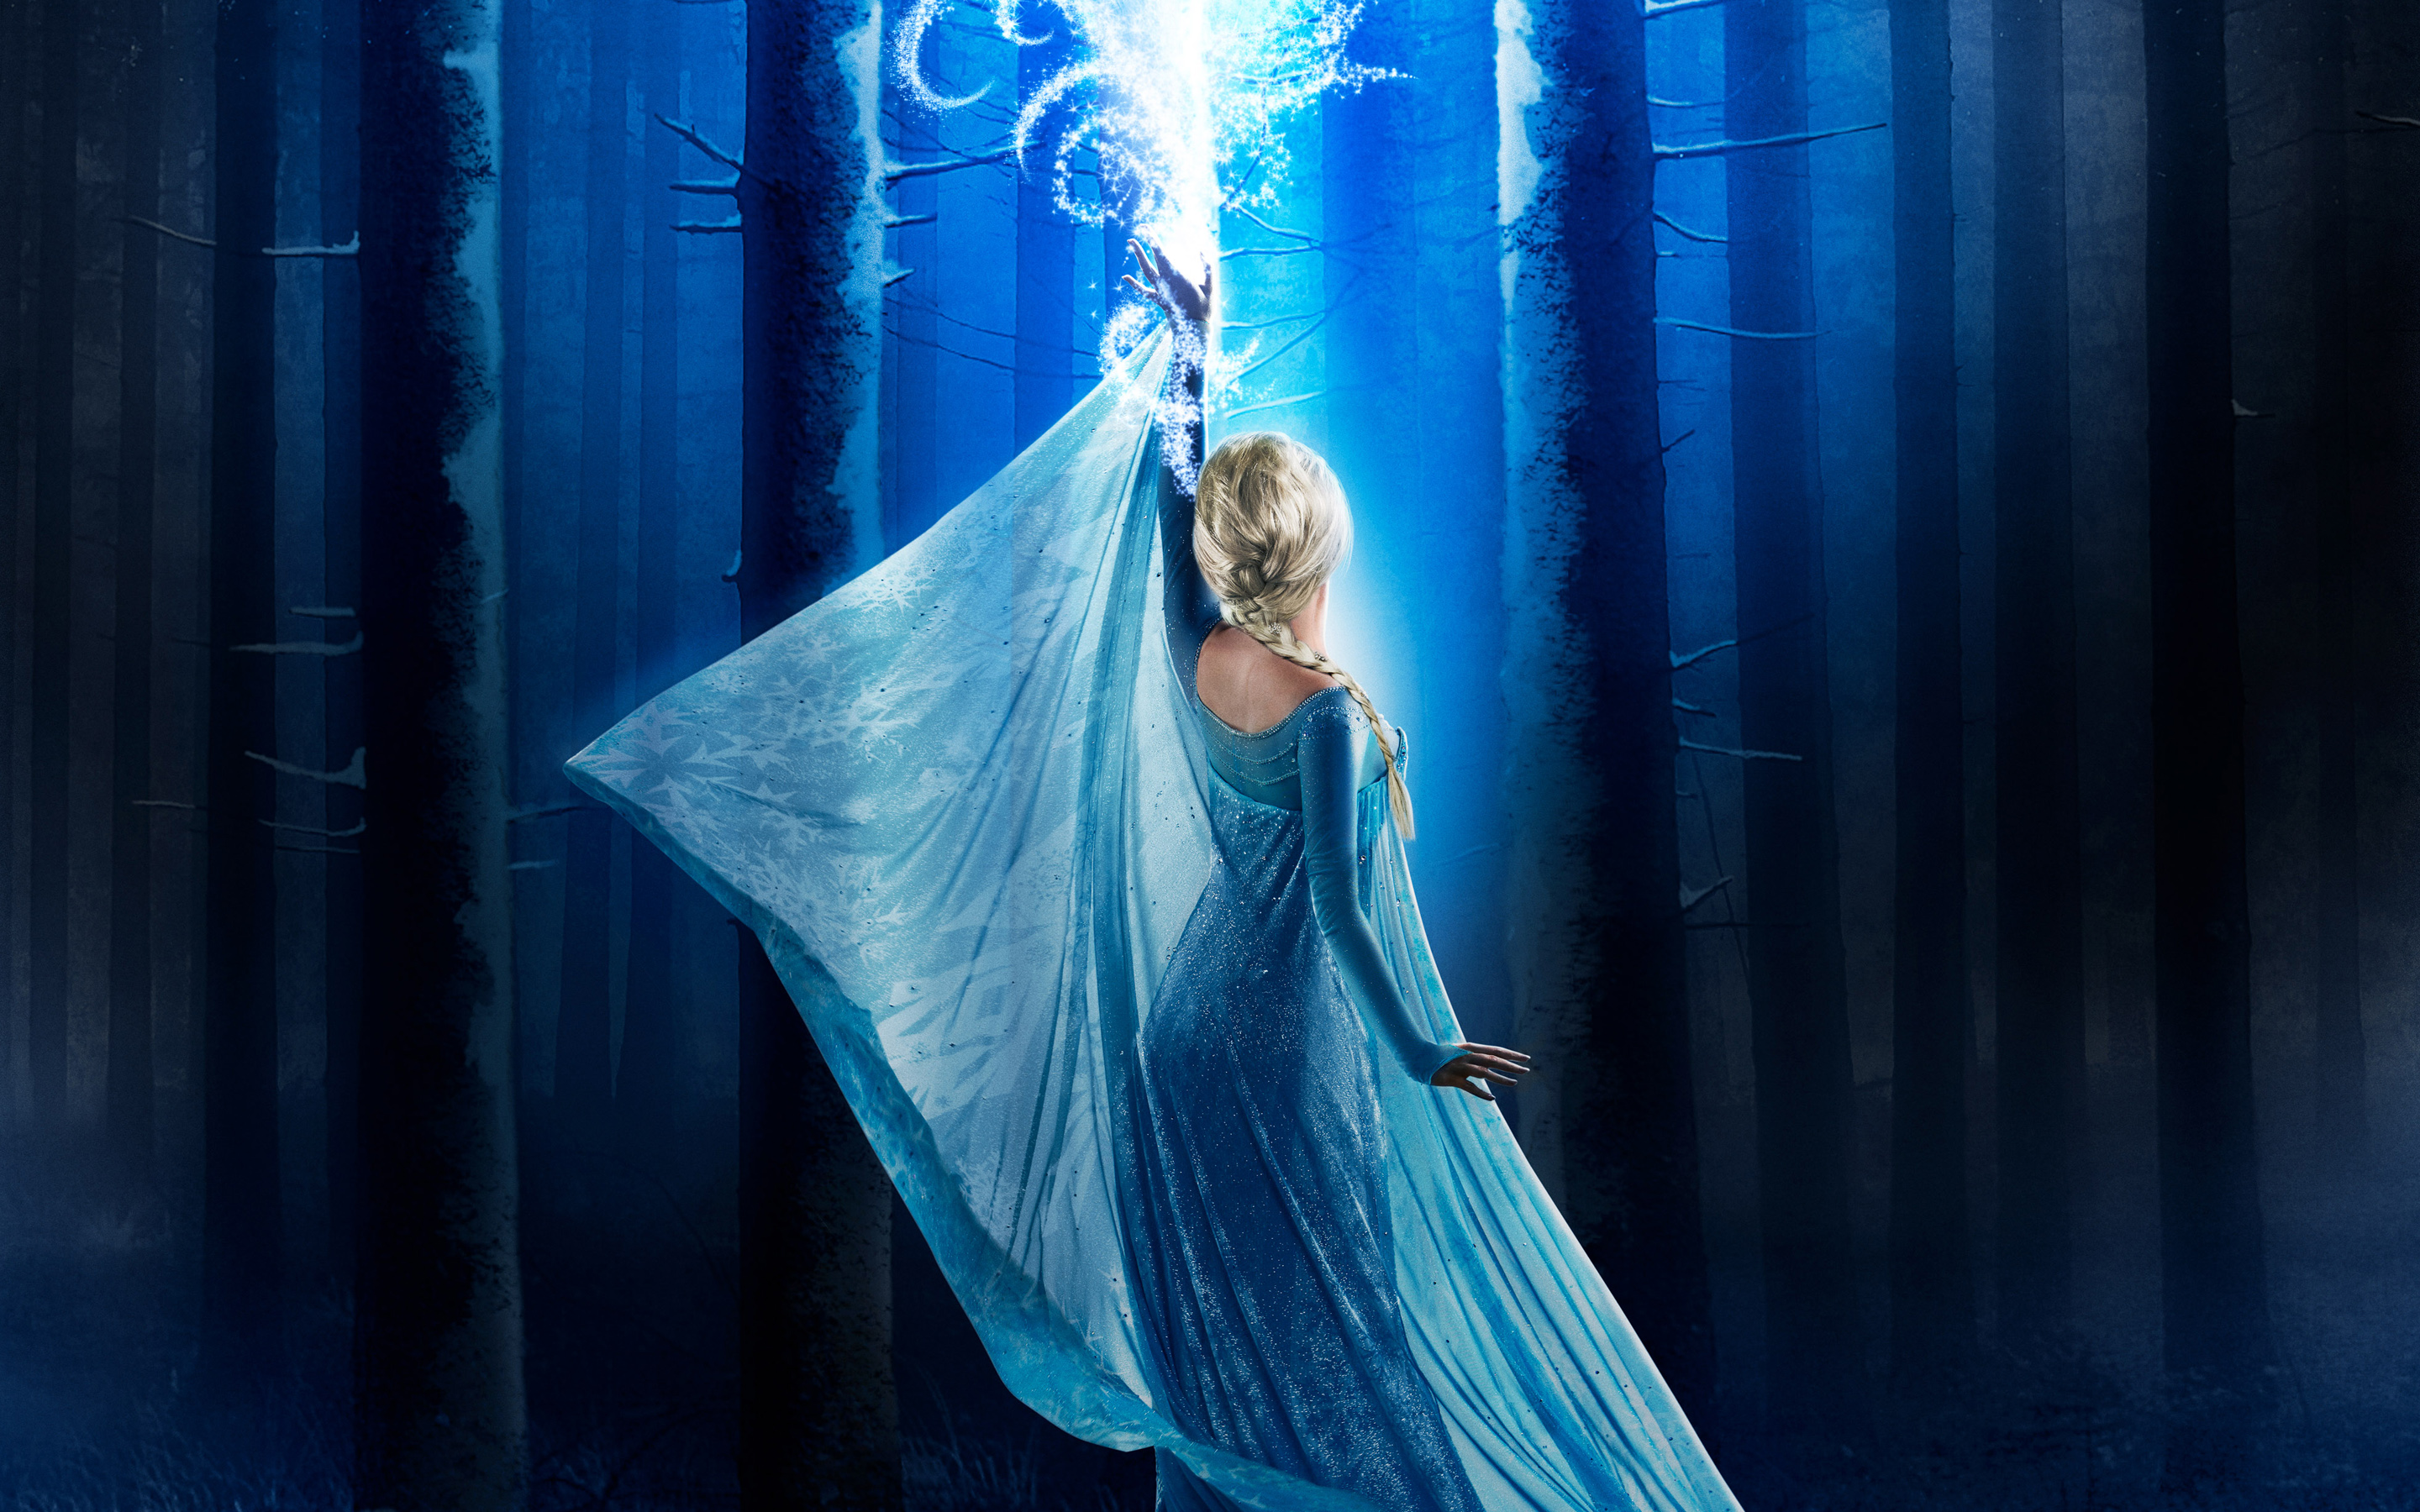 once upon a time wallpaper iphone,blue,beauty,cg artwork,photography,dress